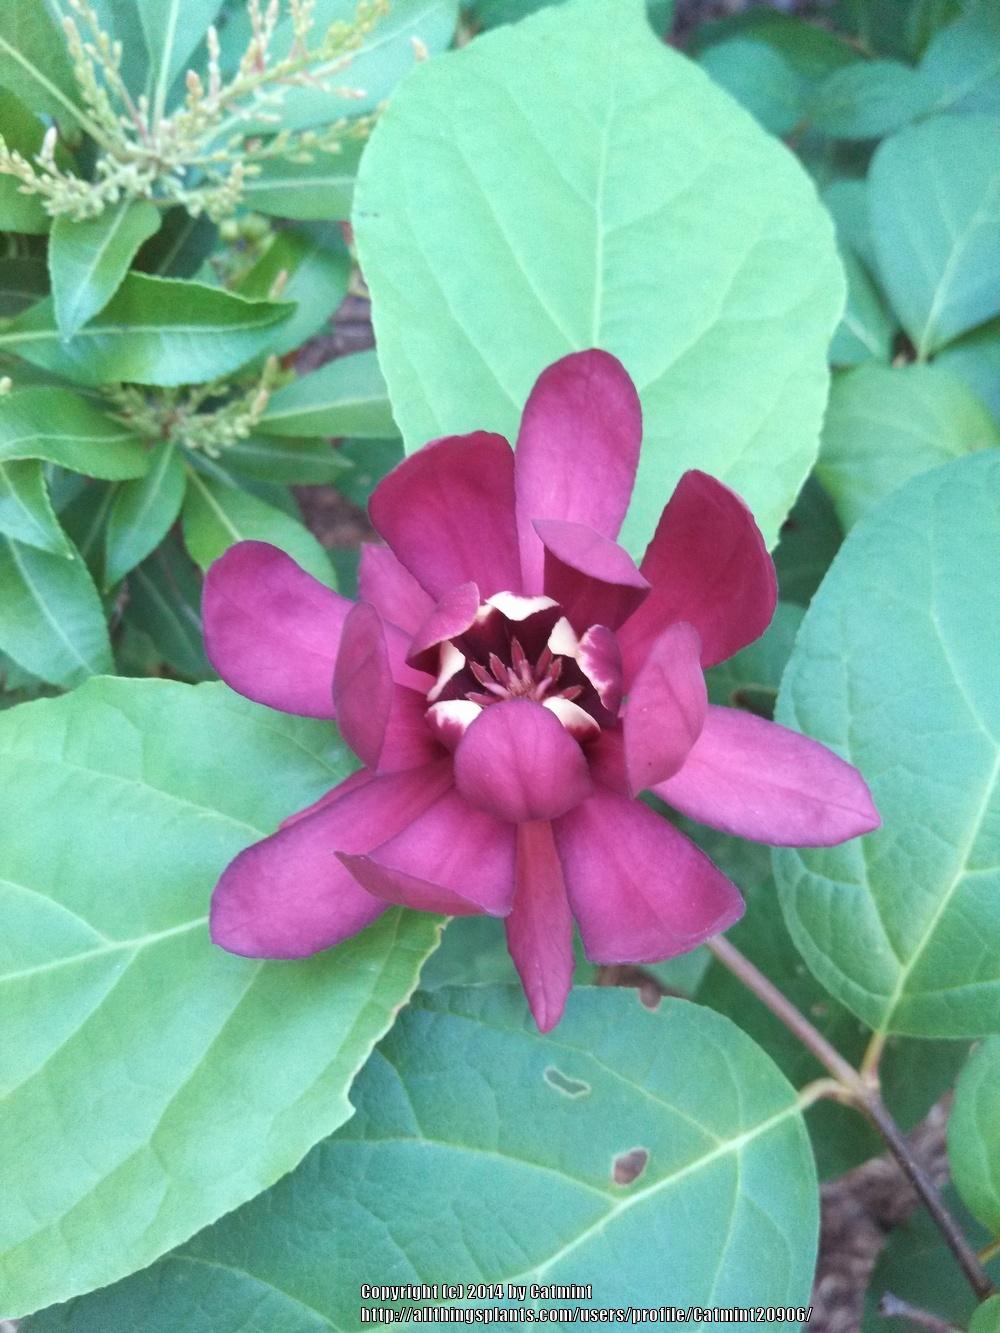 Photo of Sweet Shrub (Calycanthus x raulstonii 'Hartlage Wine') uploaded by Catmint20906